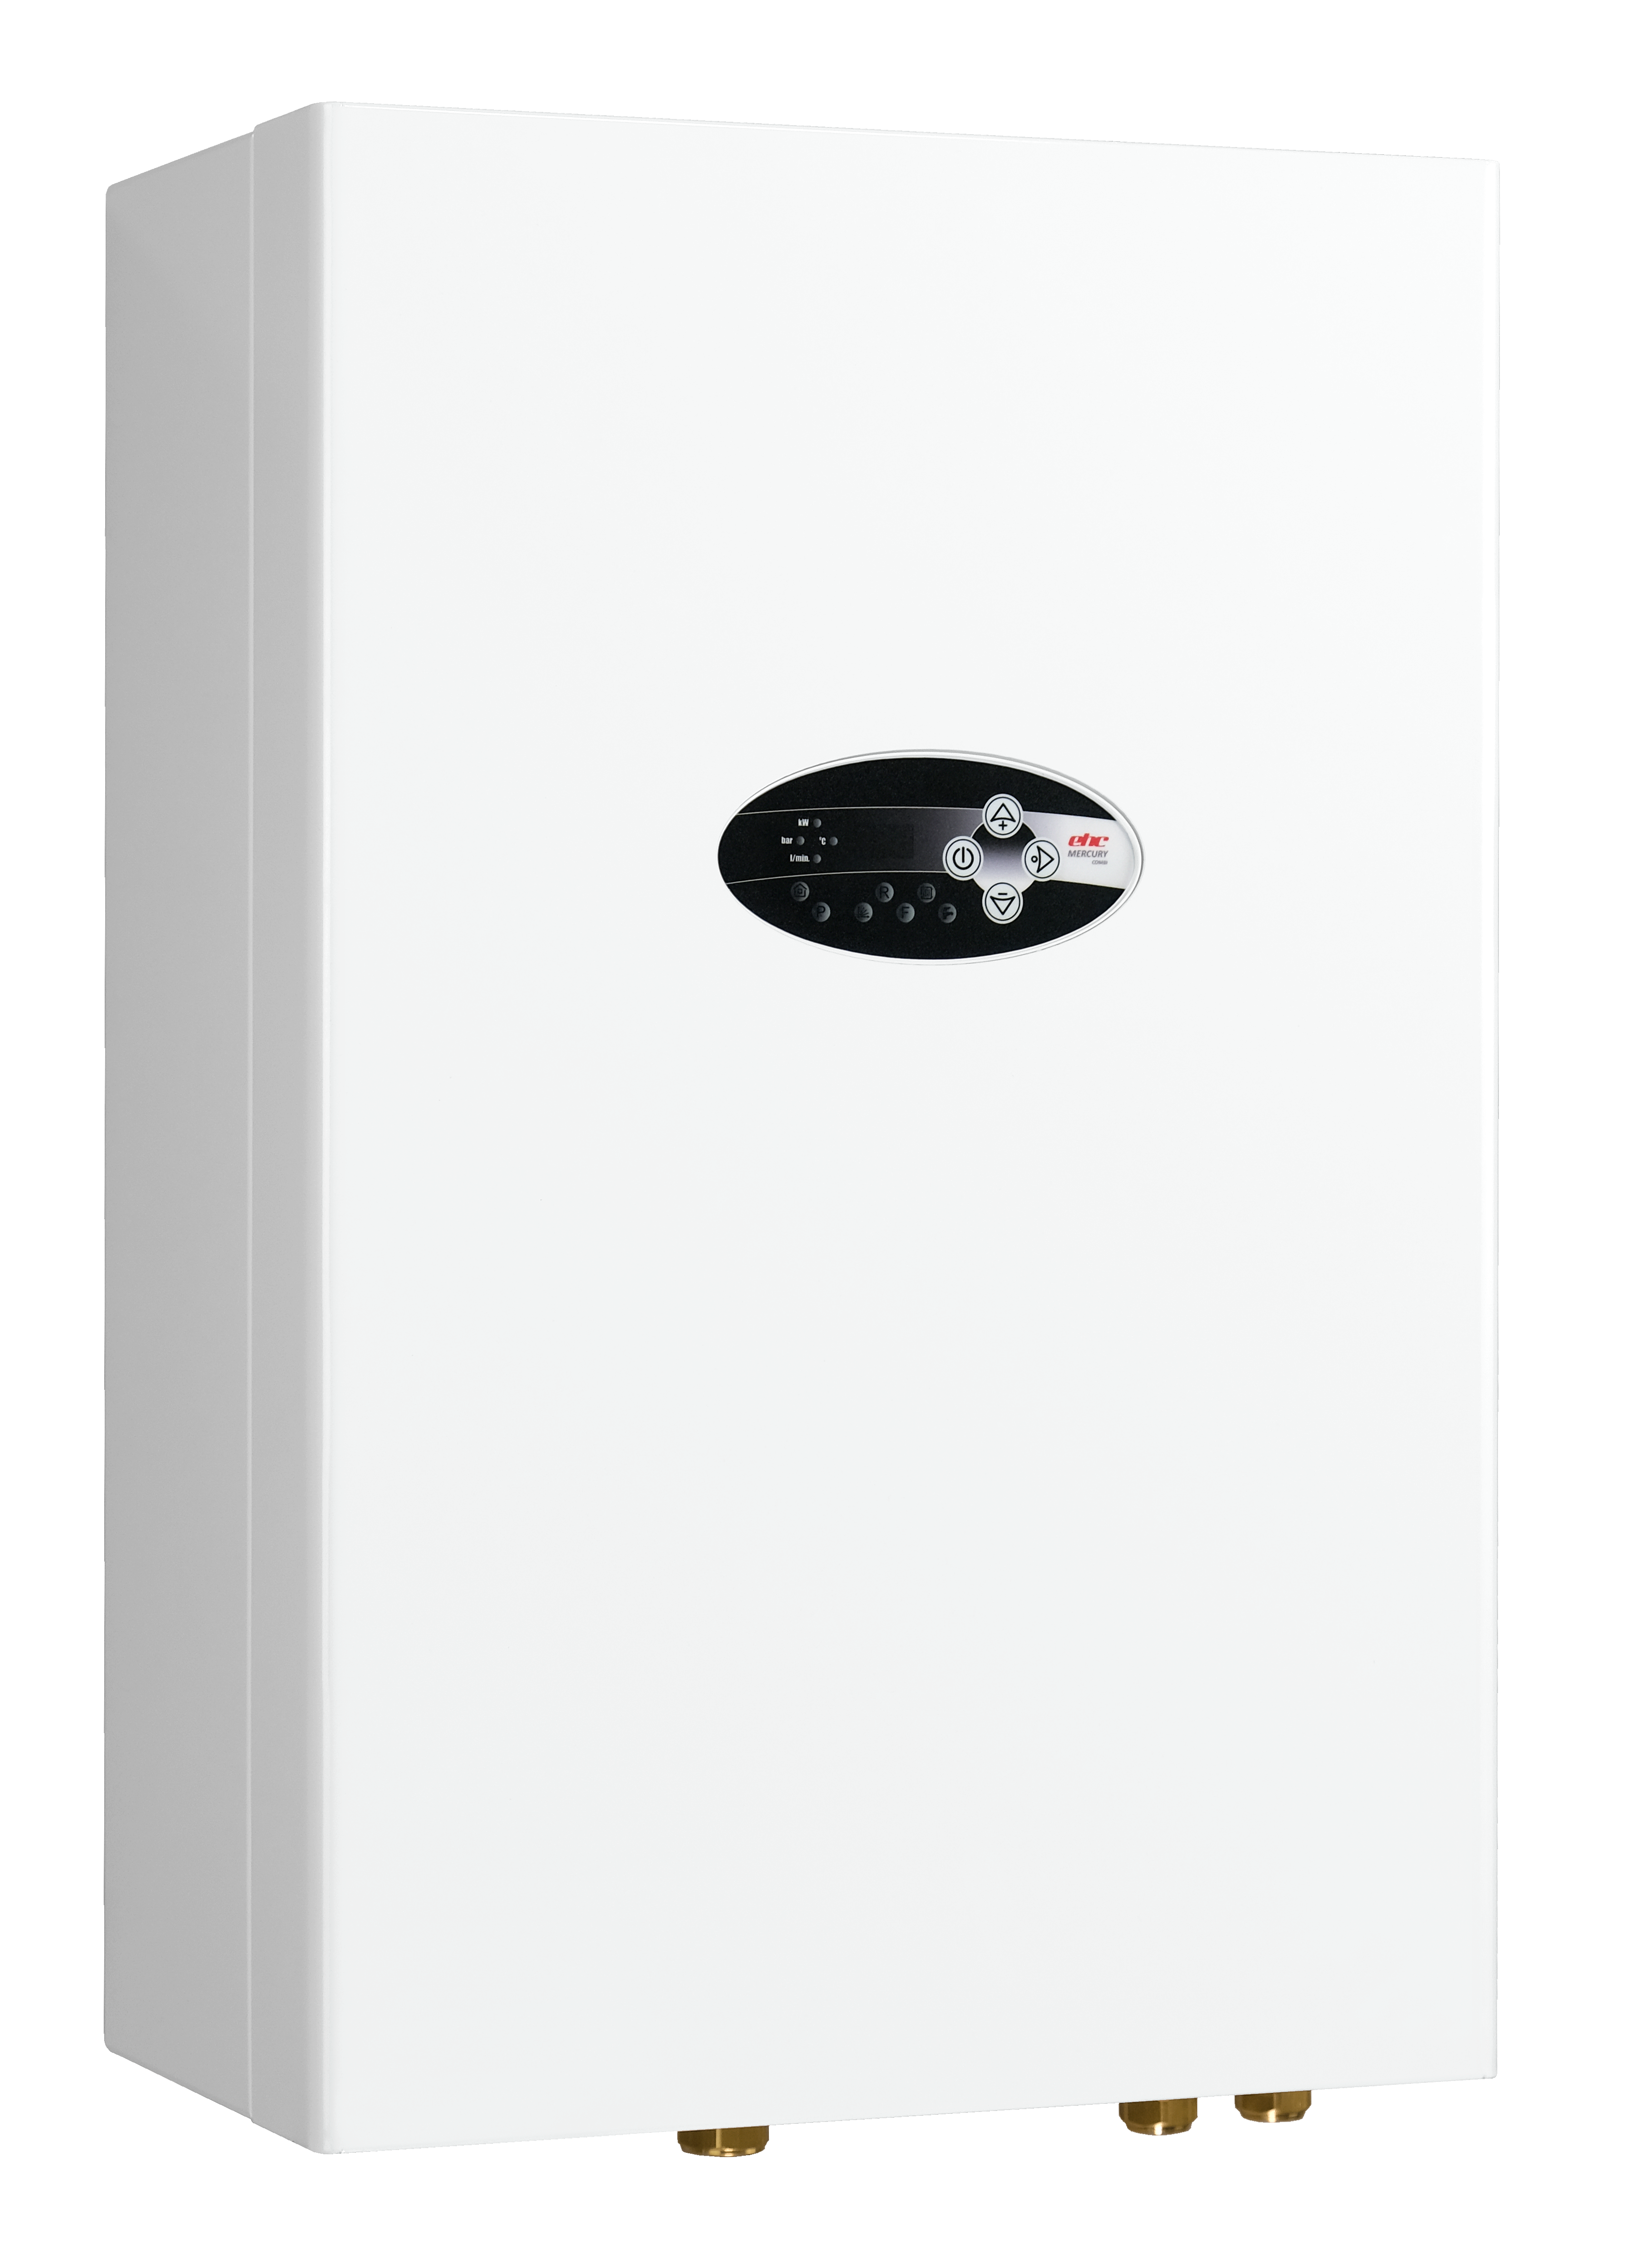 The Mercury Electric Combi Boiler from the Electric Heating Company provides a cost-effective alternative to electric storage heating, oil, solid fuel or LPG systems. @EHC_UK